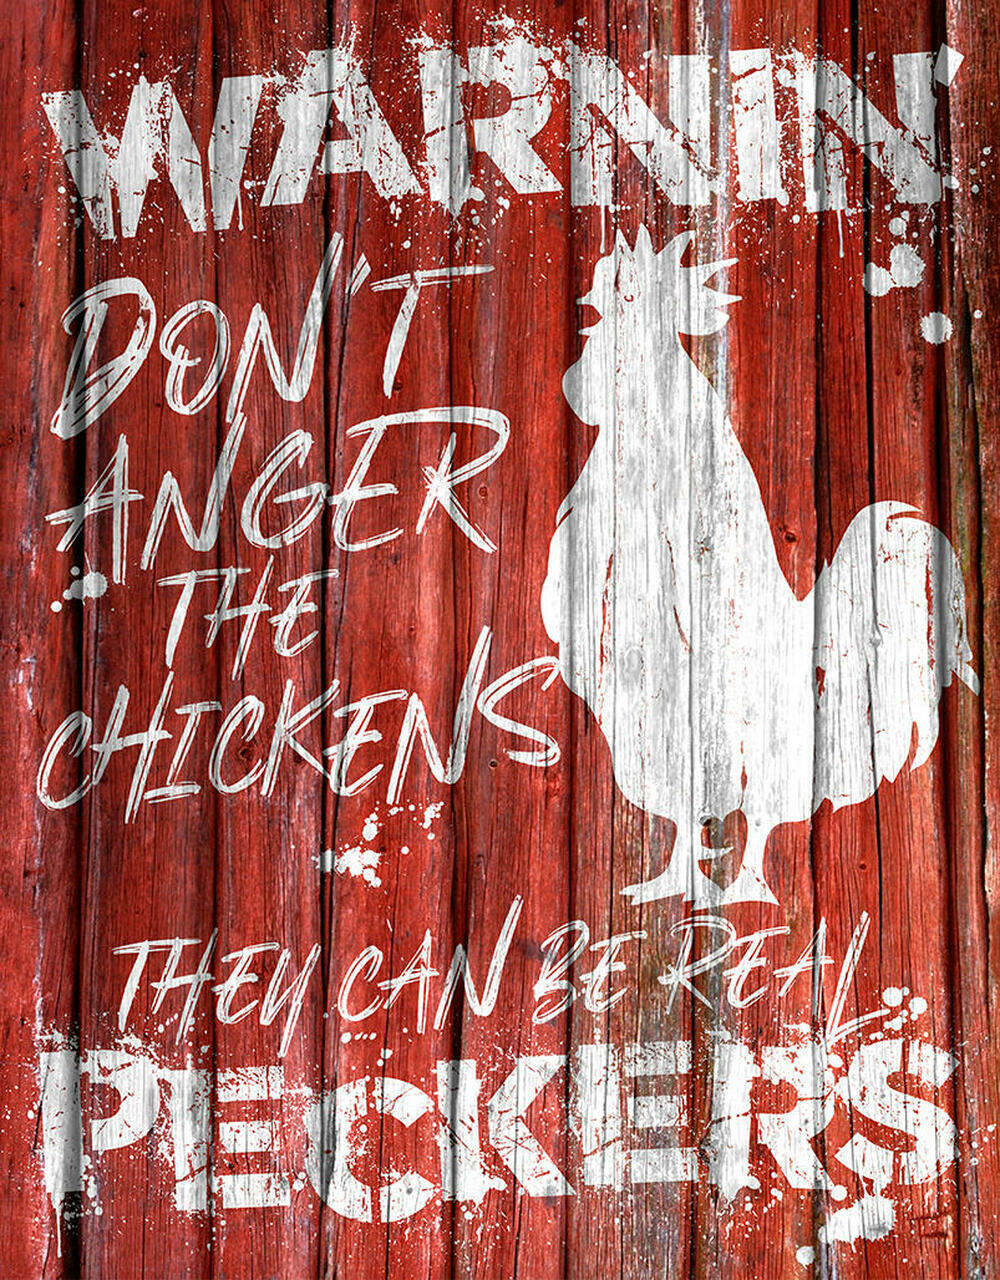 Chicken Warning Can Be Peckers Farm Rooster Kitchen Funny Humor Wall Metal Sign - $15.83